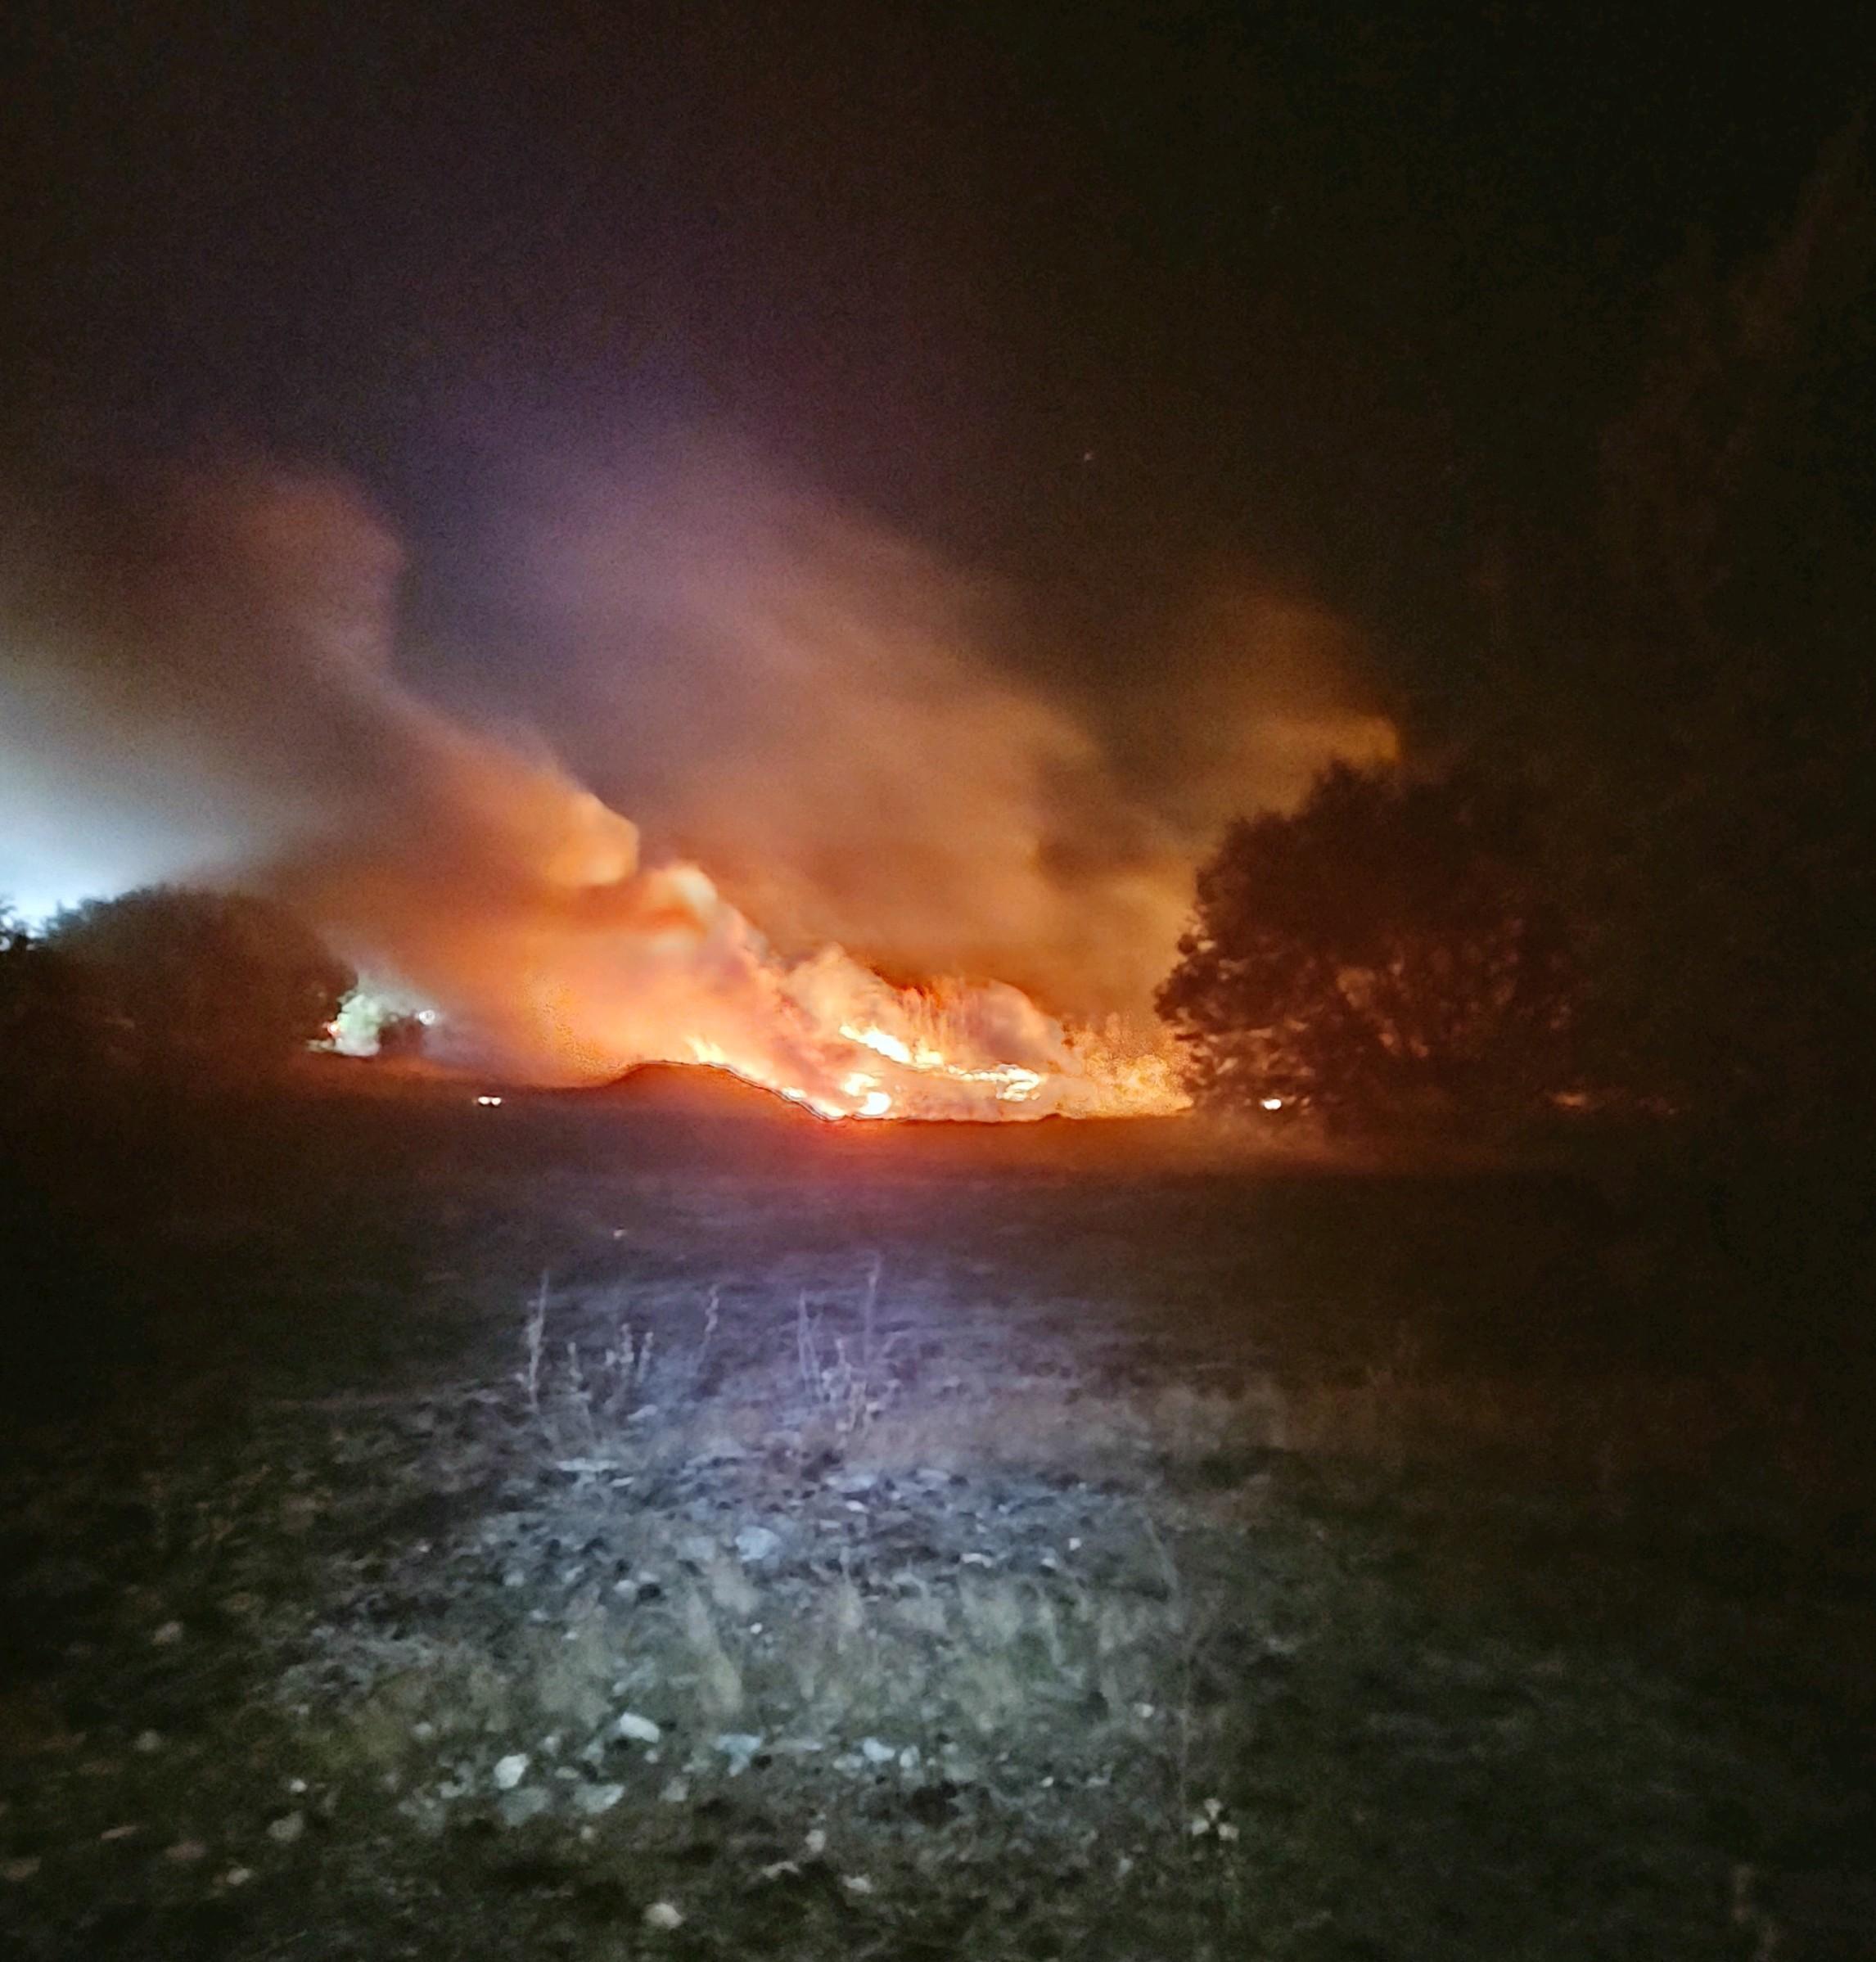 Nighttime flareup on northern perimeter of fire. Photo Credit: Chris Owens